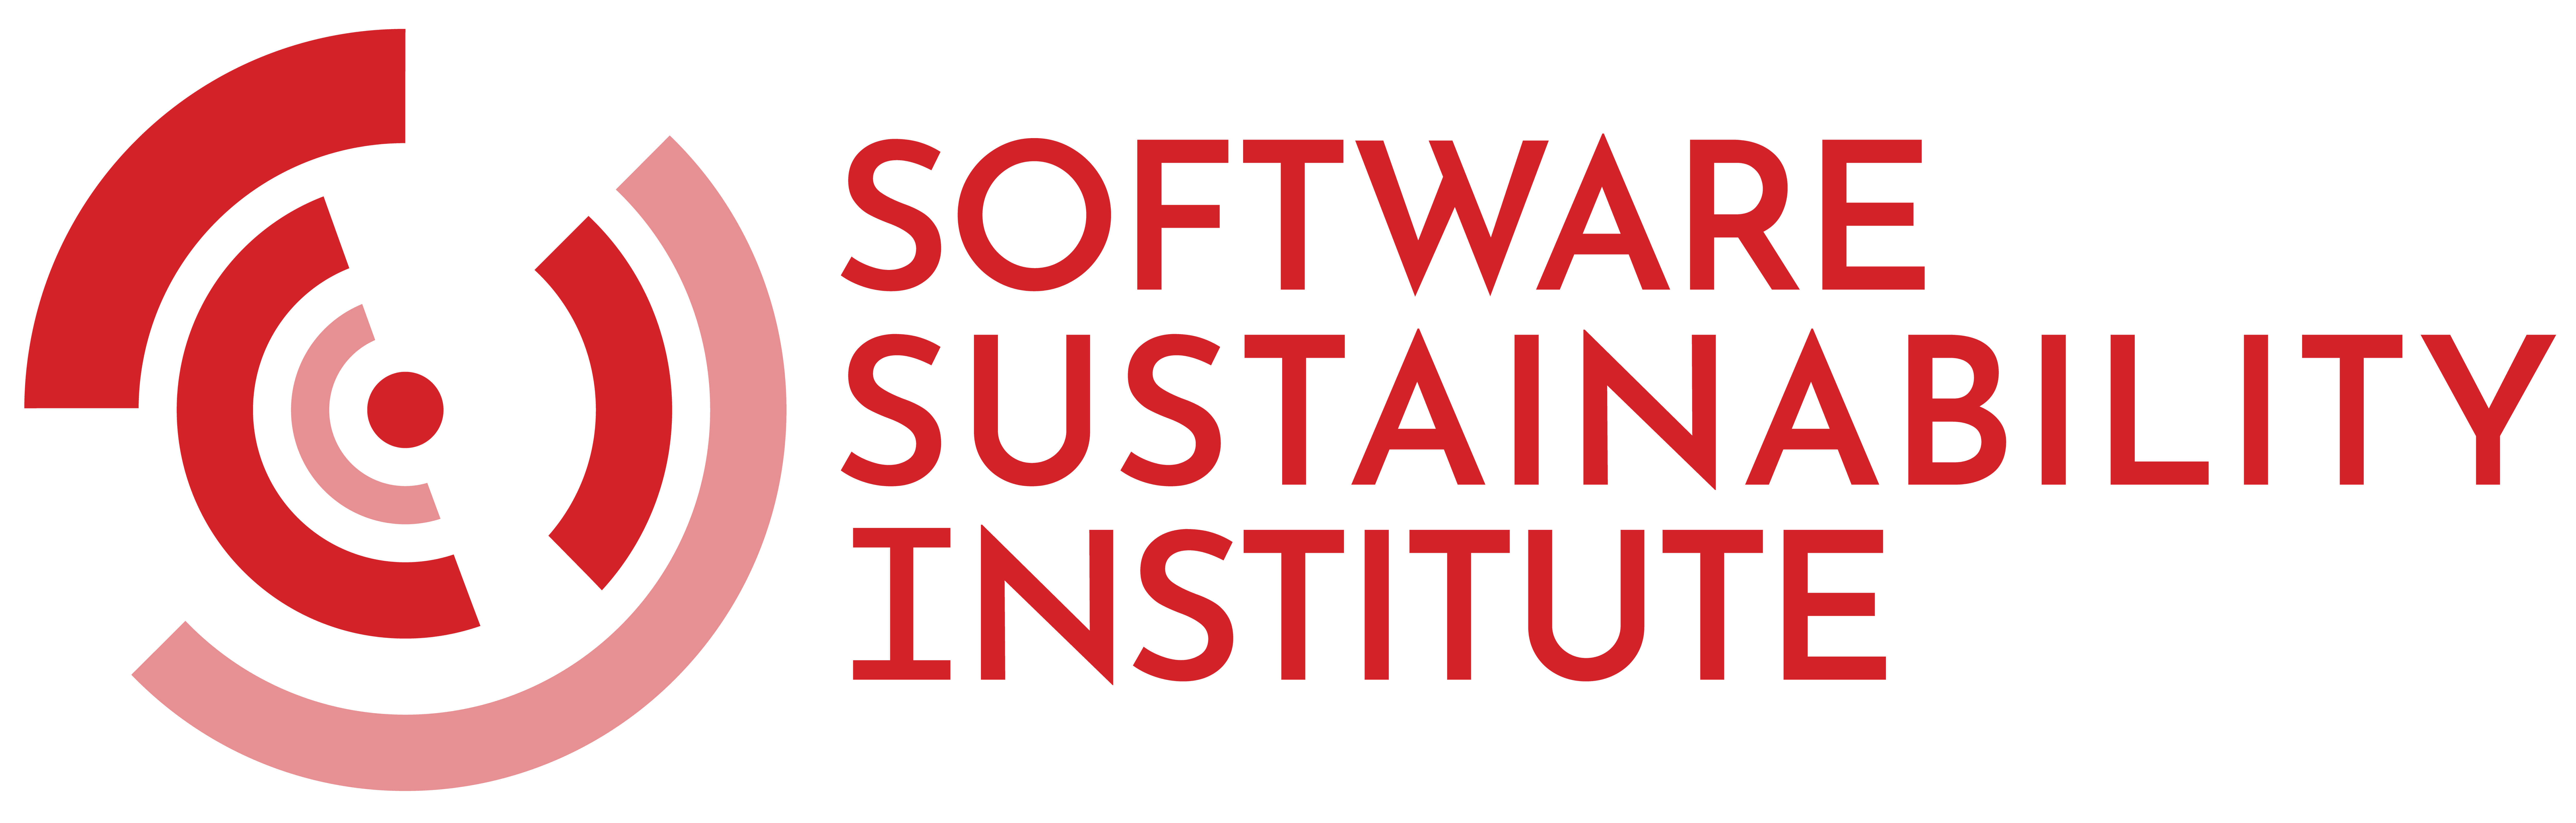 Logo of the Software Sustainability Institute